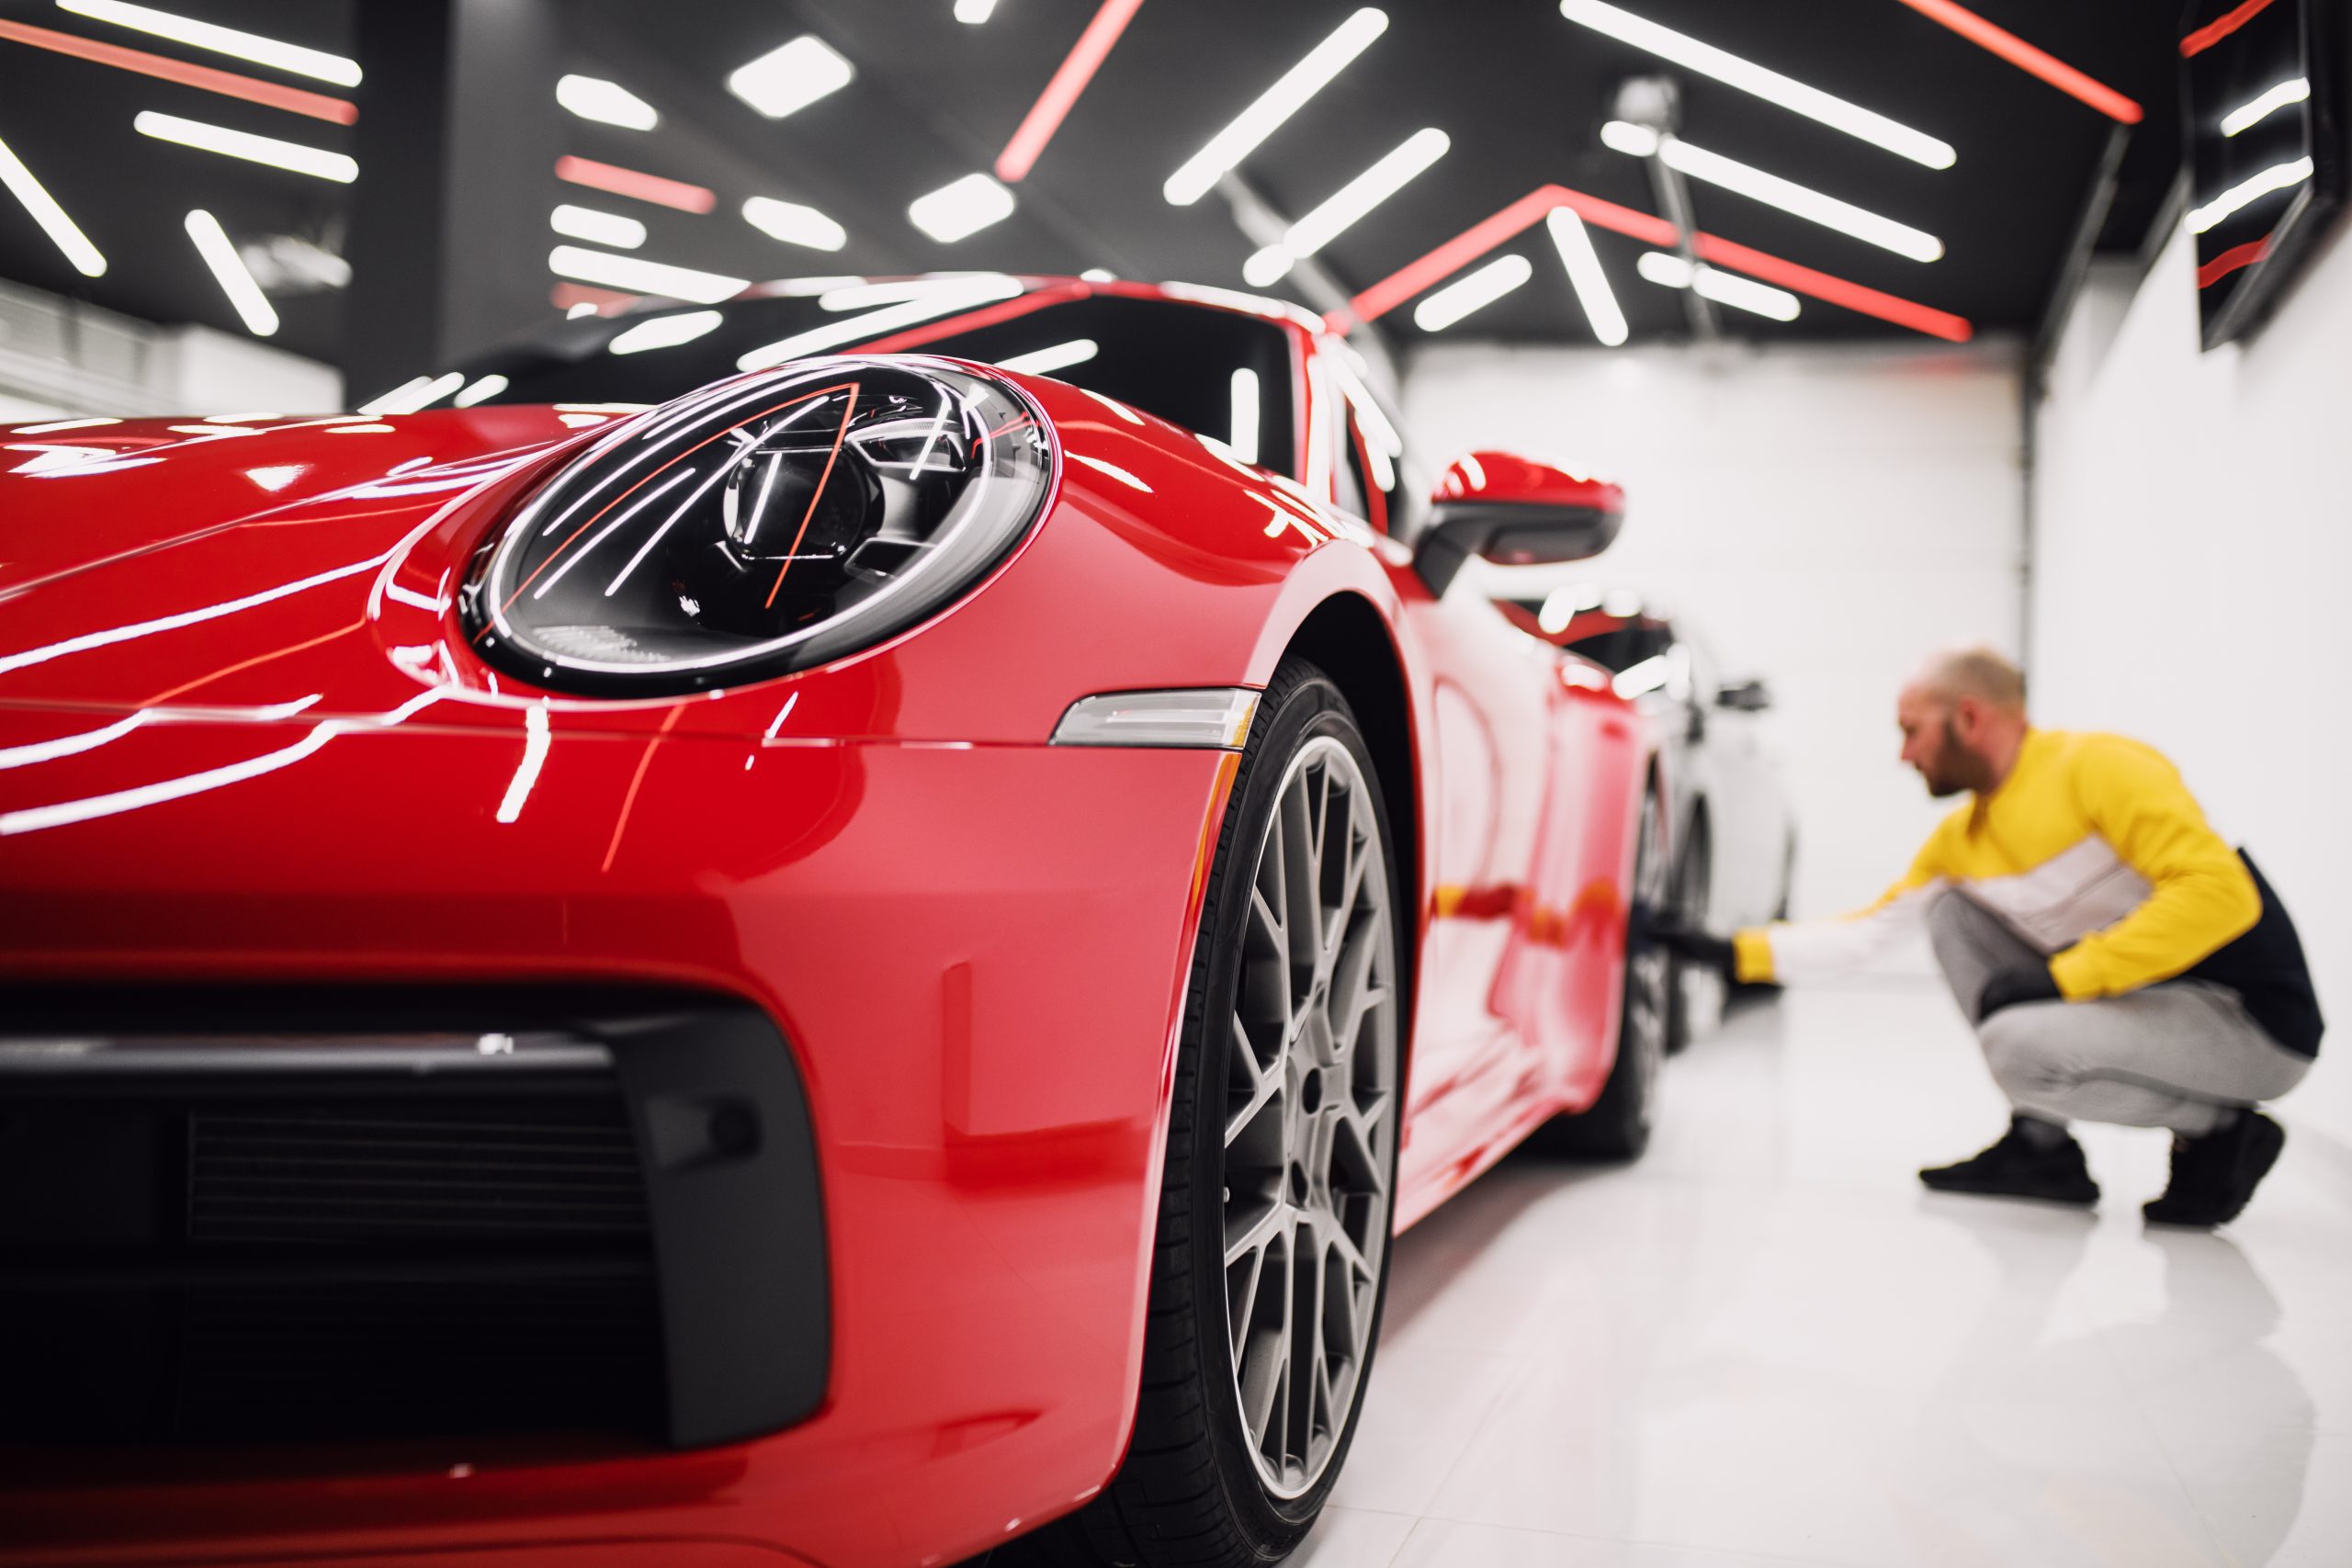 The Pros and Cons of Ceramic Coating a Car